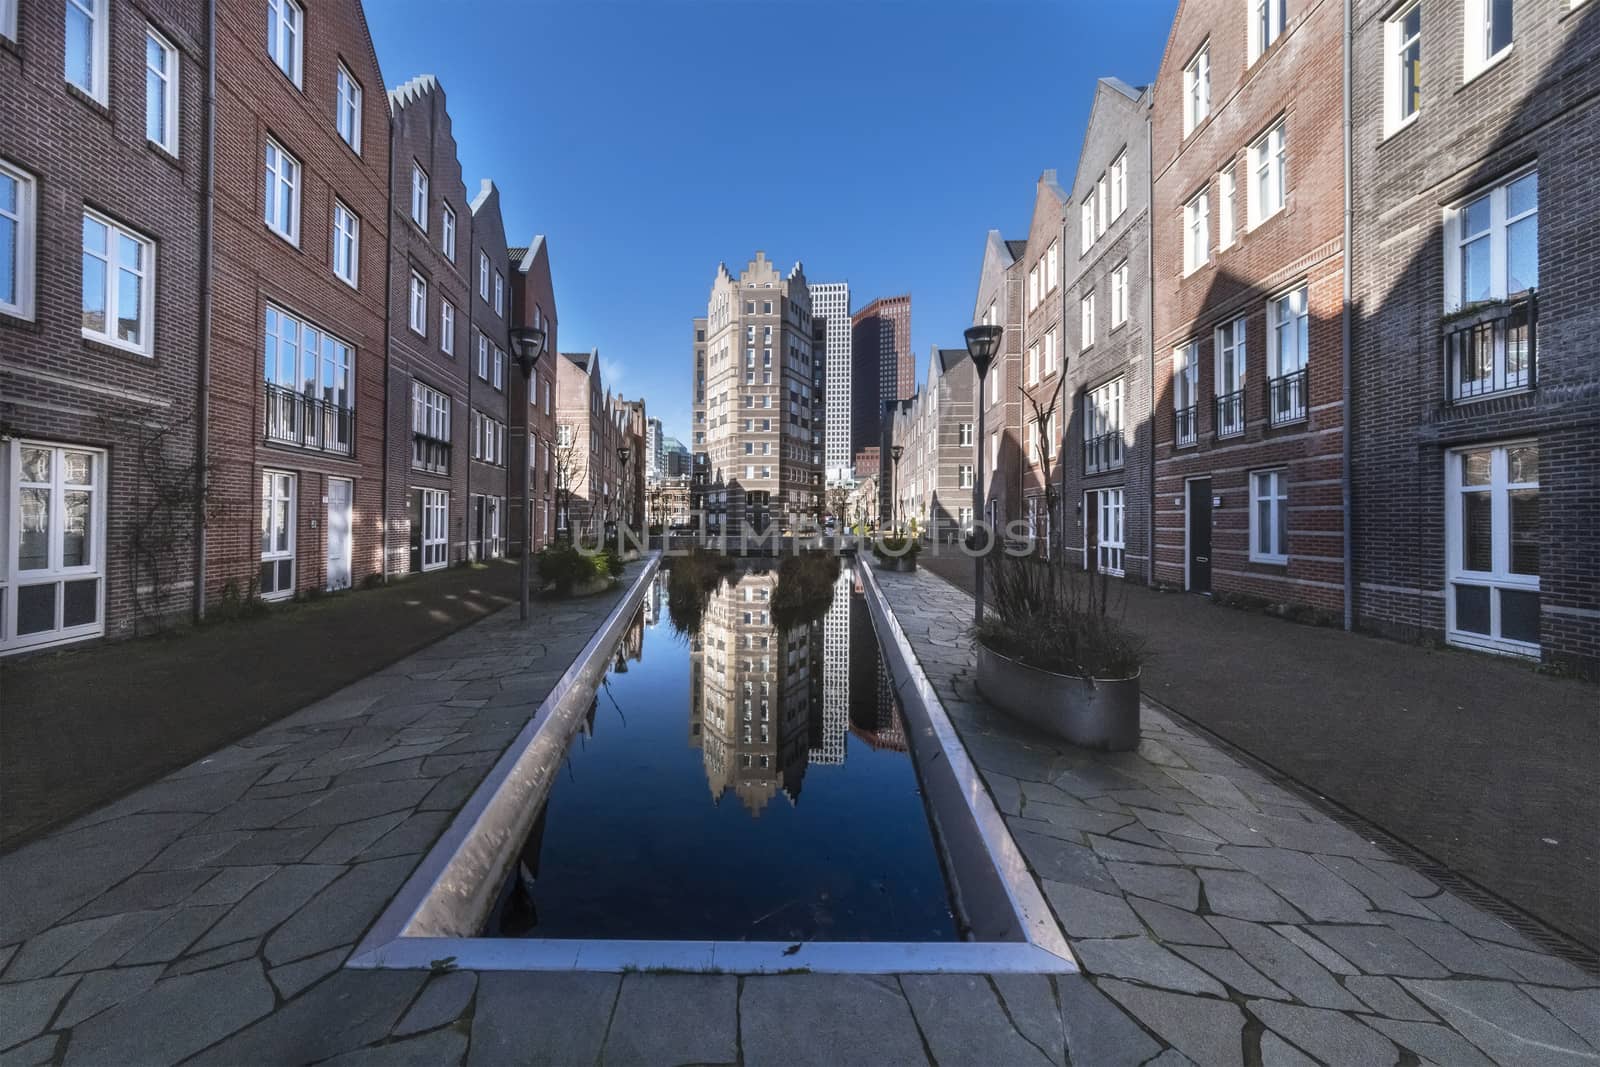 View of the Dutch architecture in a quiet and calm resident area of The Hague, Netherlands